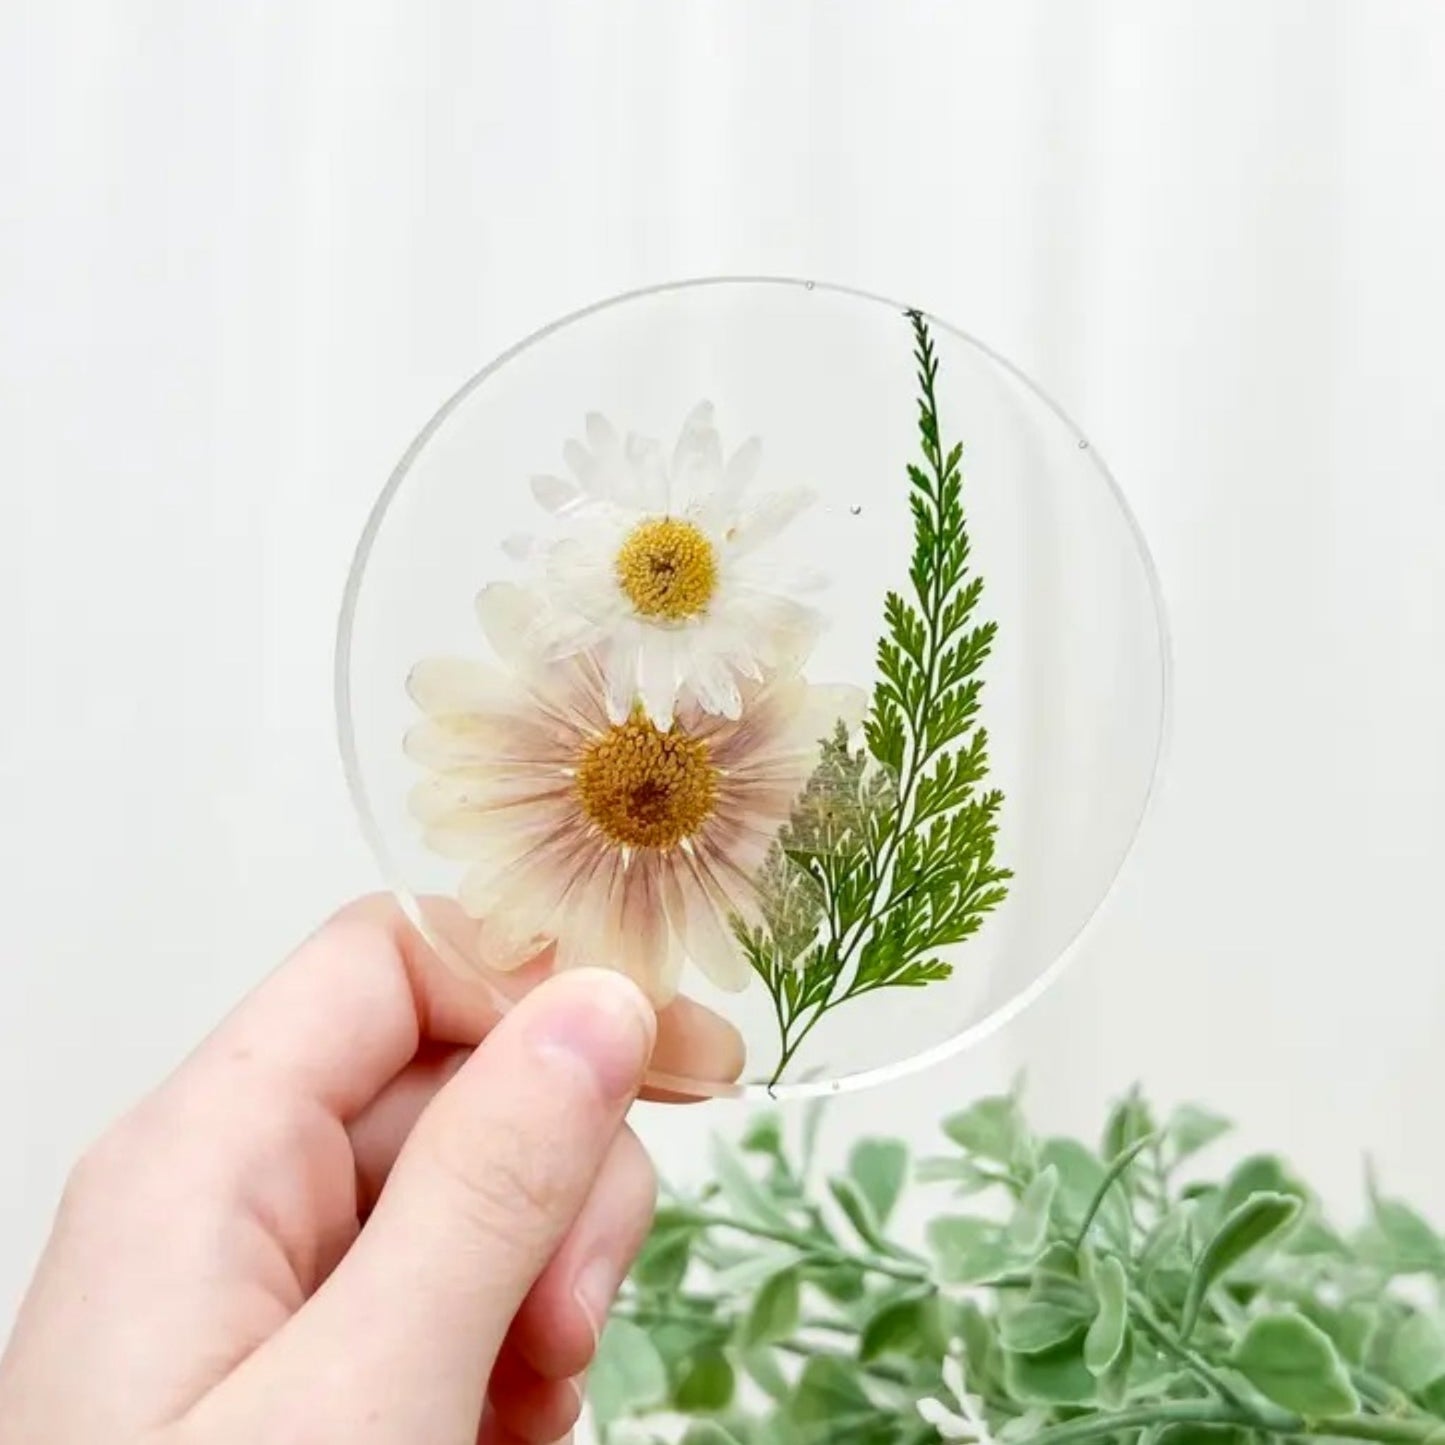 Pressed Flower Coaster - Made in the USA